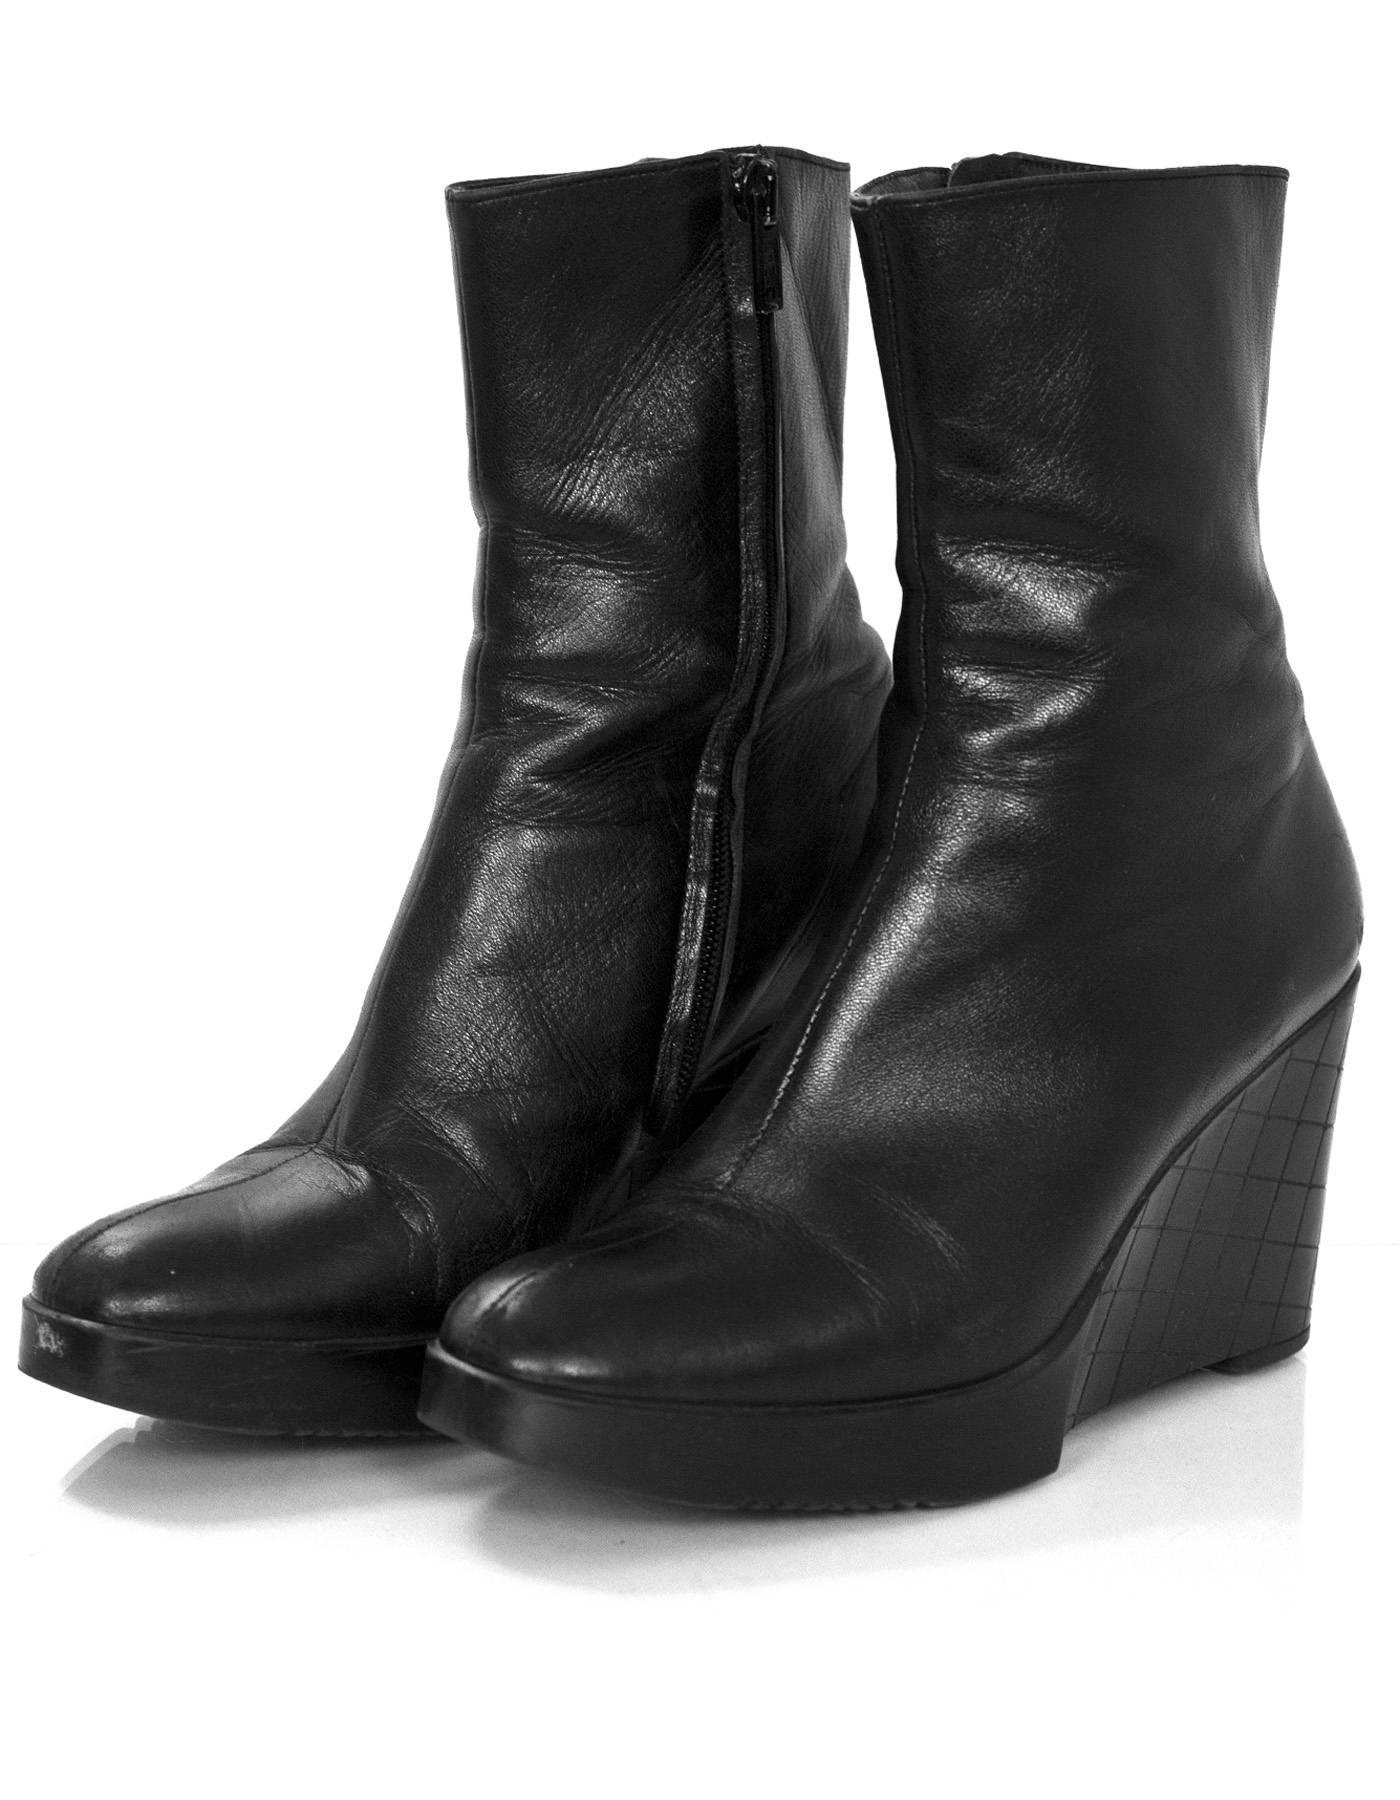 Robert Clergie Black Leather Wedge Ankle Boots Sz 6.5

Made In: France
Color: Black
Materials: Leather
Closure/Opening: Sisde zip closure
Sole Stamp: Robert Clergie Made in France
Overall Condition: Very good pre-owned condition with the exception